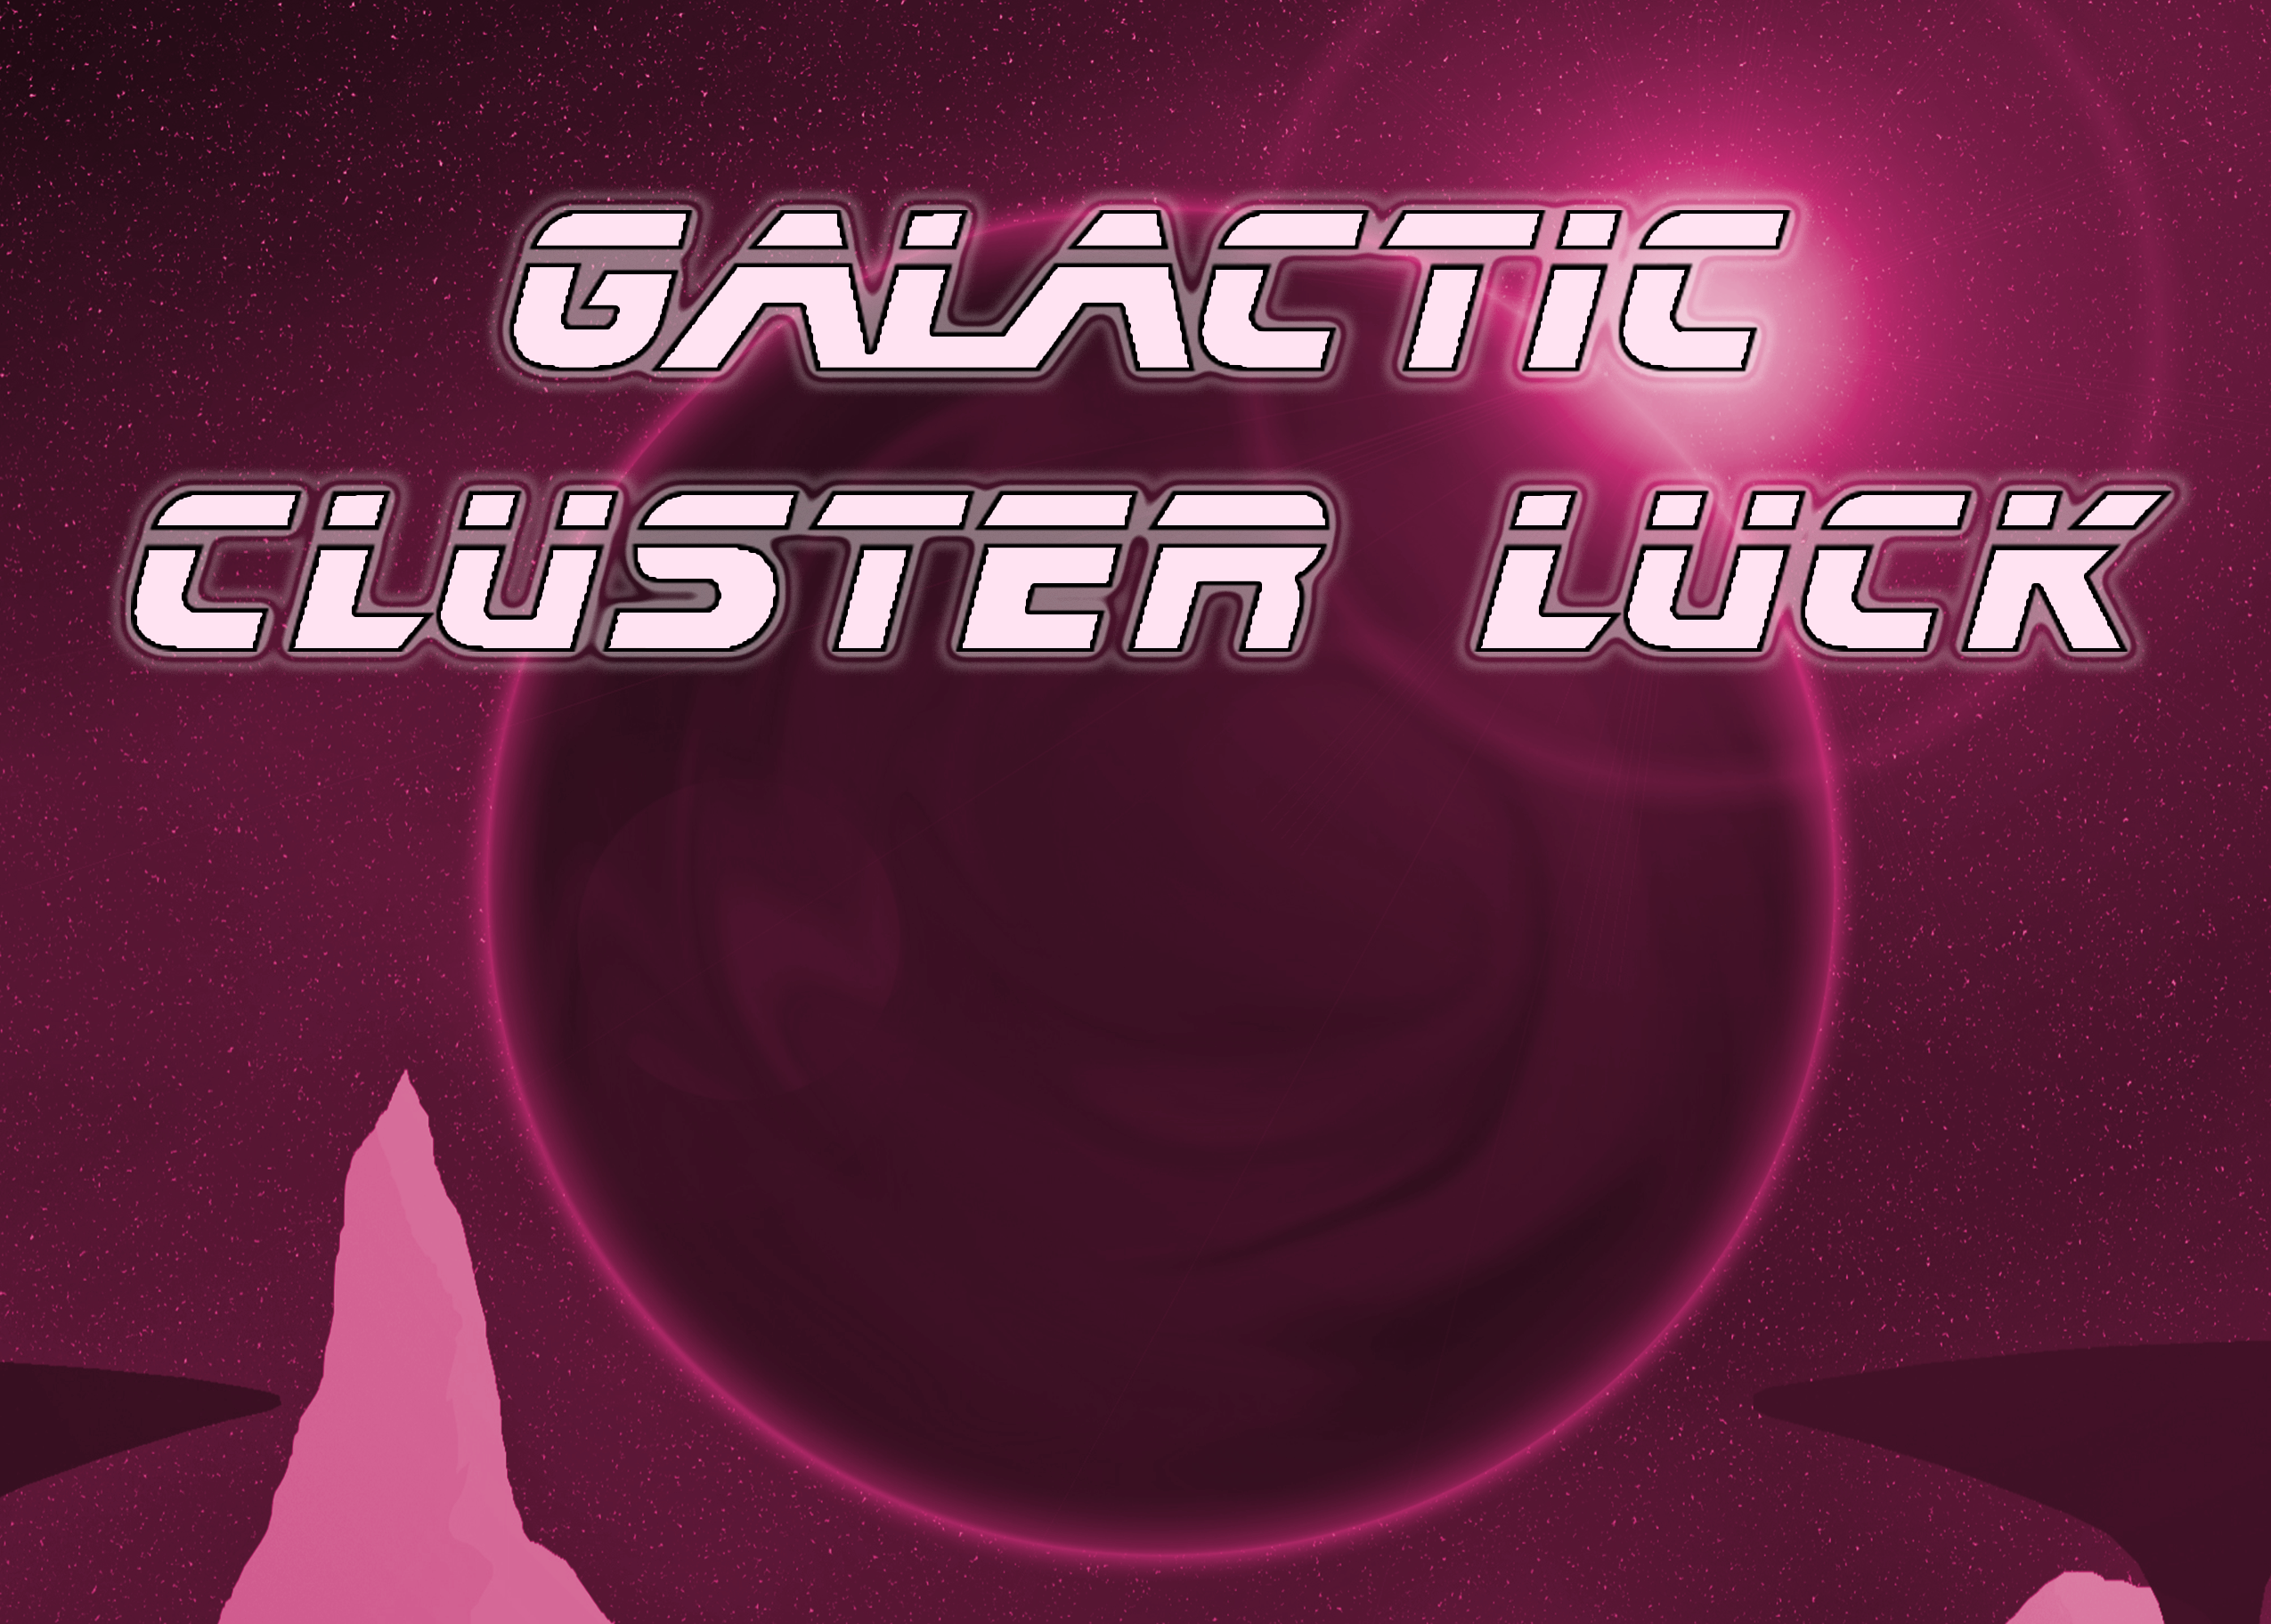 Galactic Cluster Luck